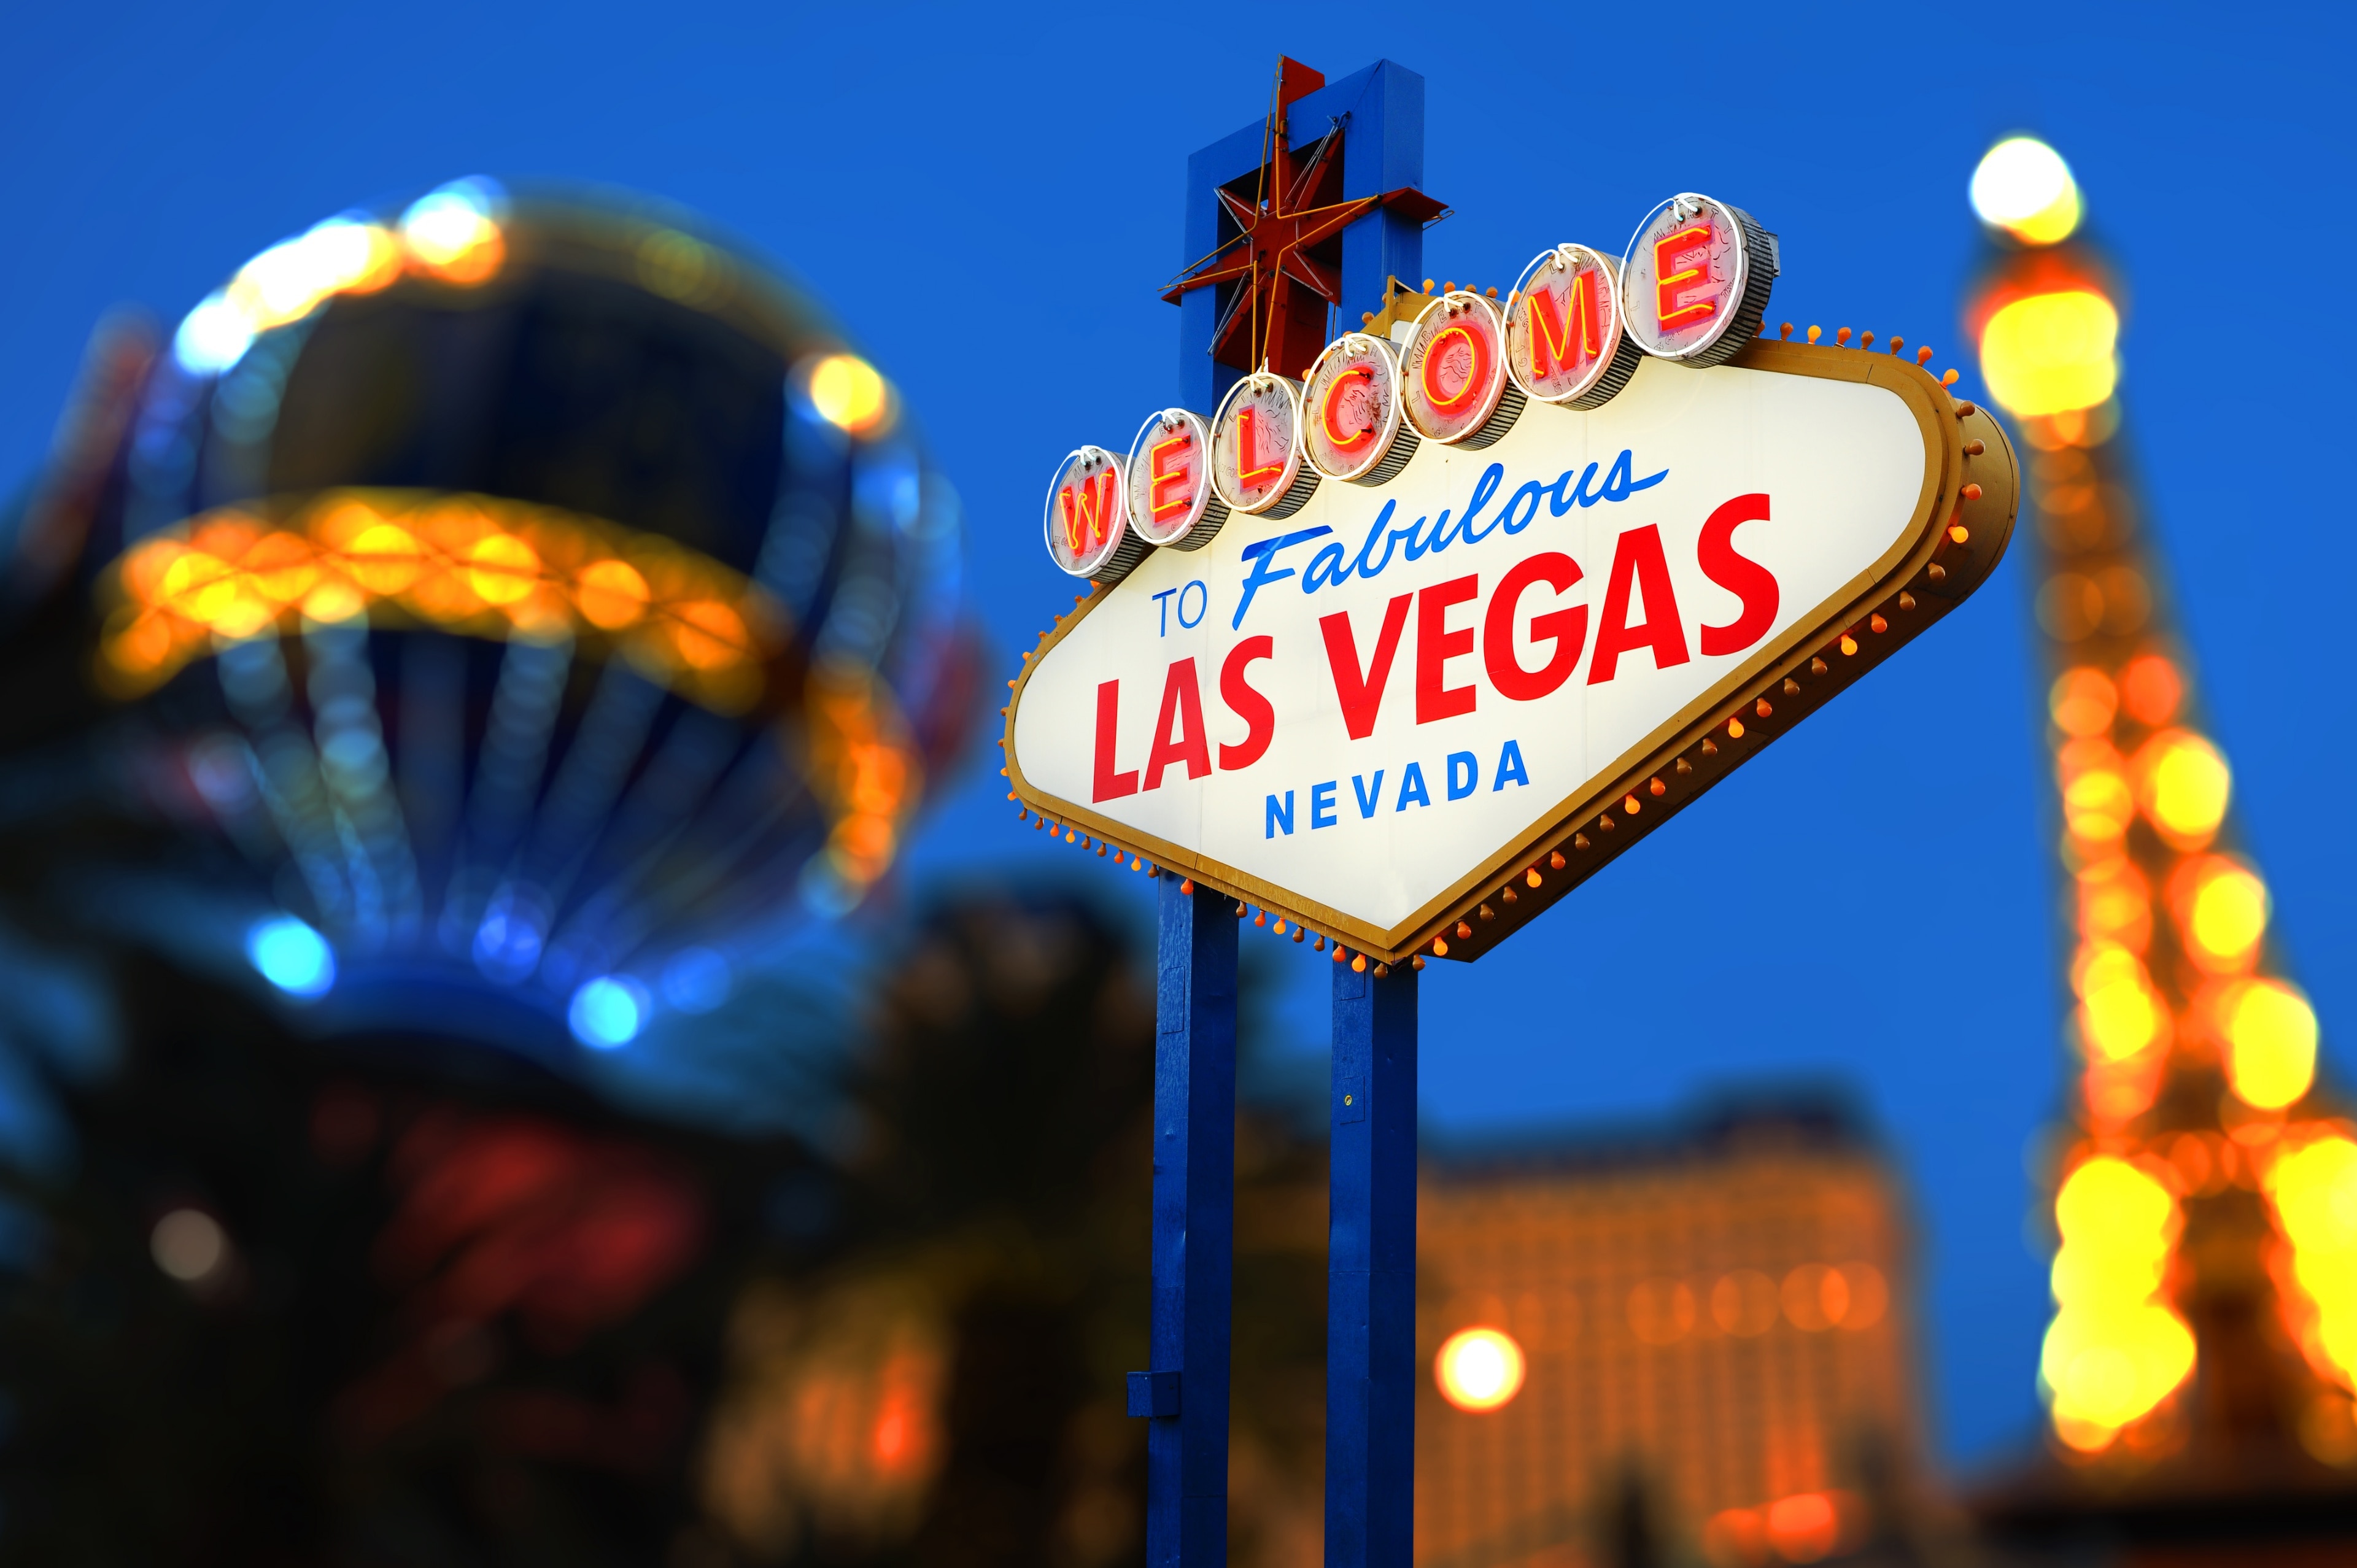 Welcome to Fabulous Las Vegas Sign in Las Vegas Strip - Tours and